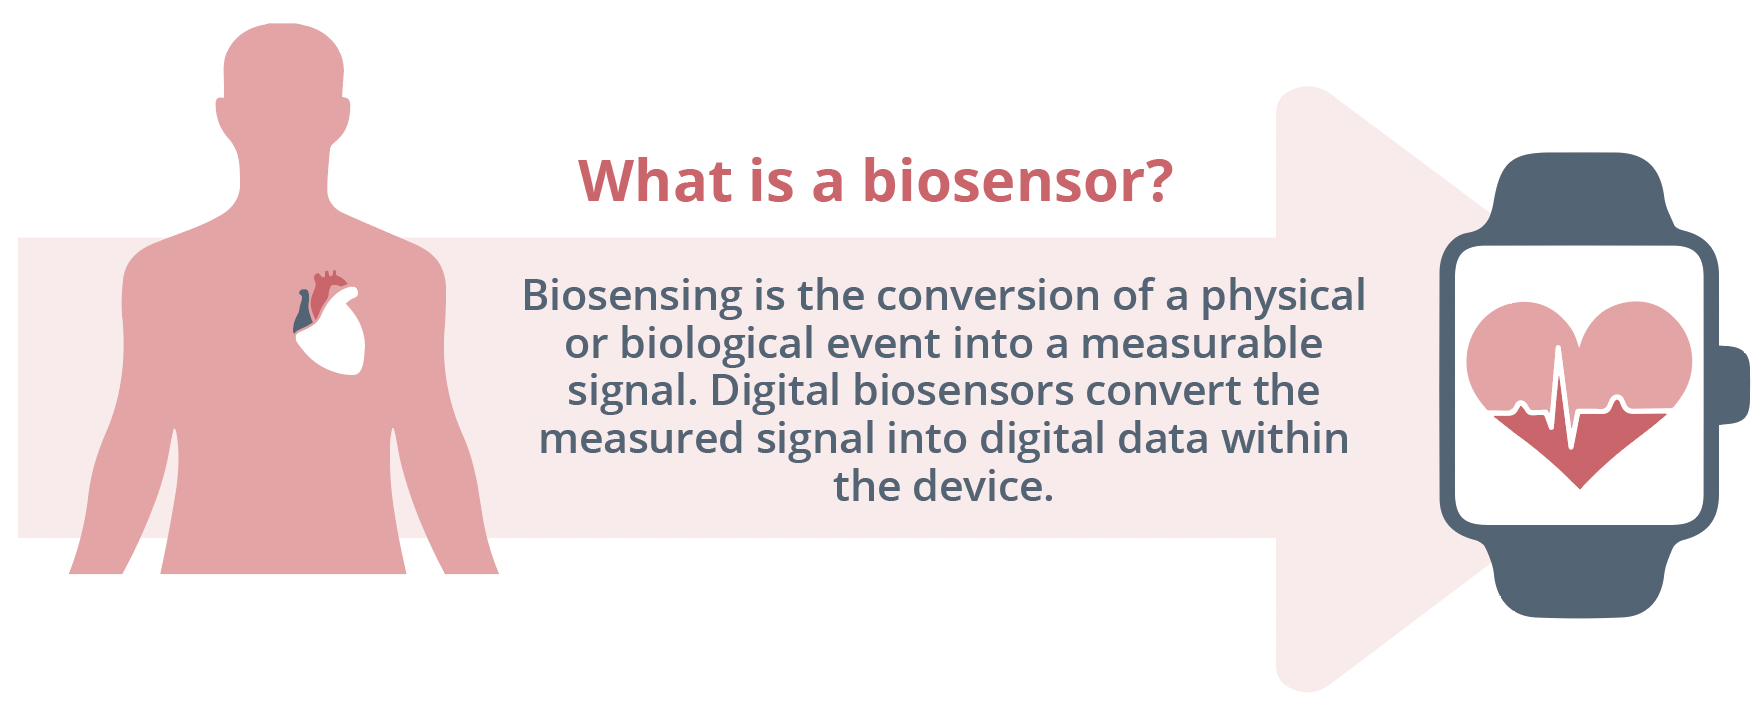 Biosensing is the conversion of a physical or biological event into a measurable signal. Digital biosensors convert the measured signal into digital data within the device